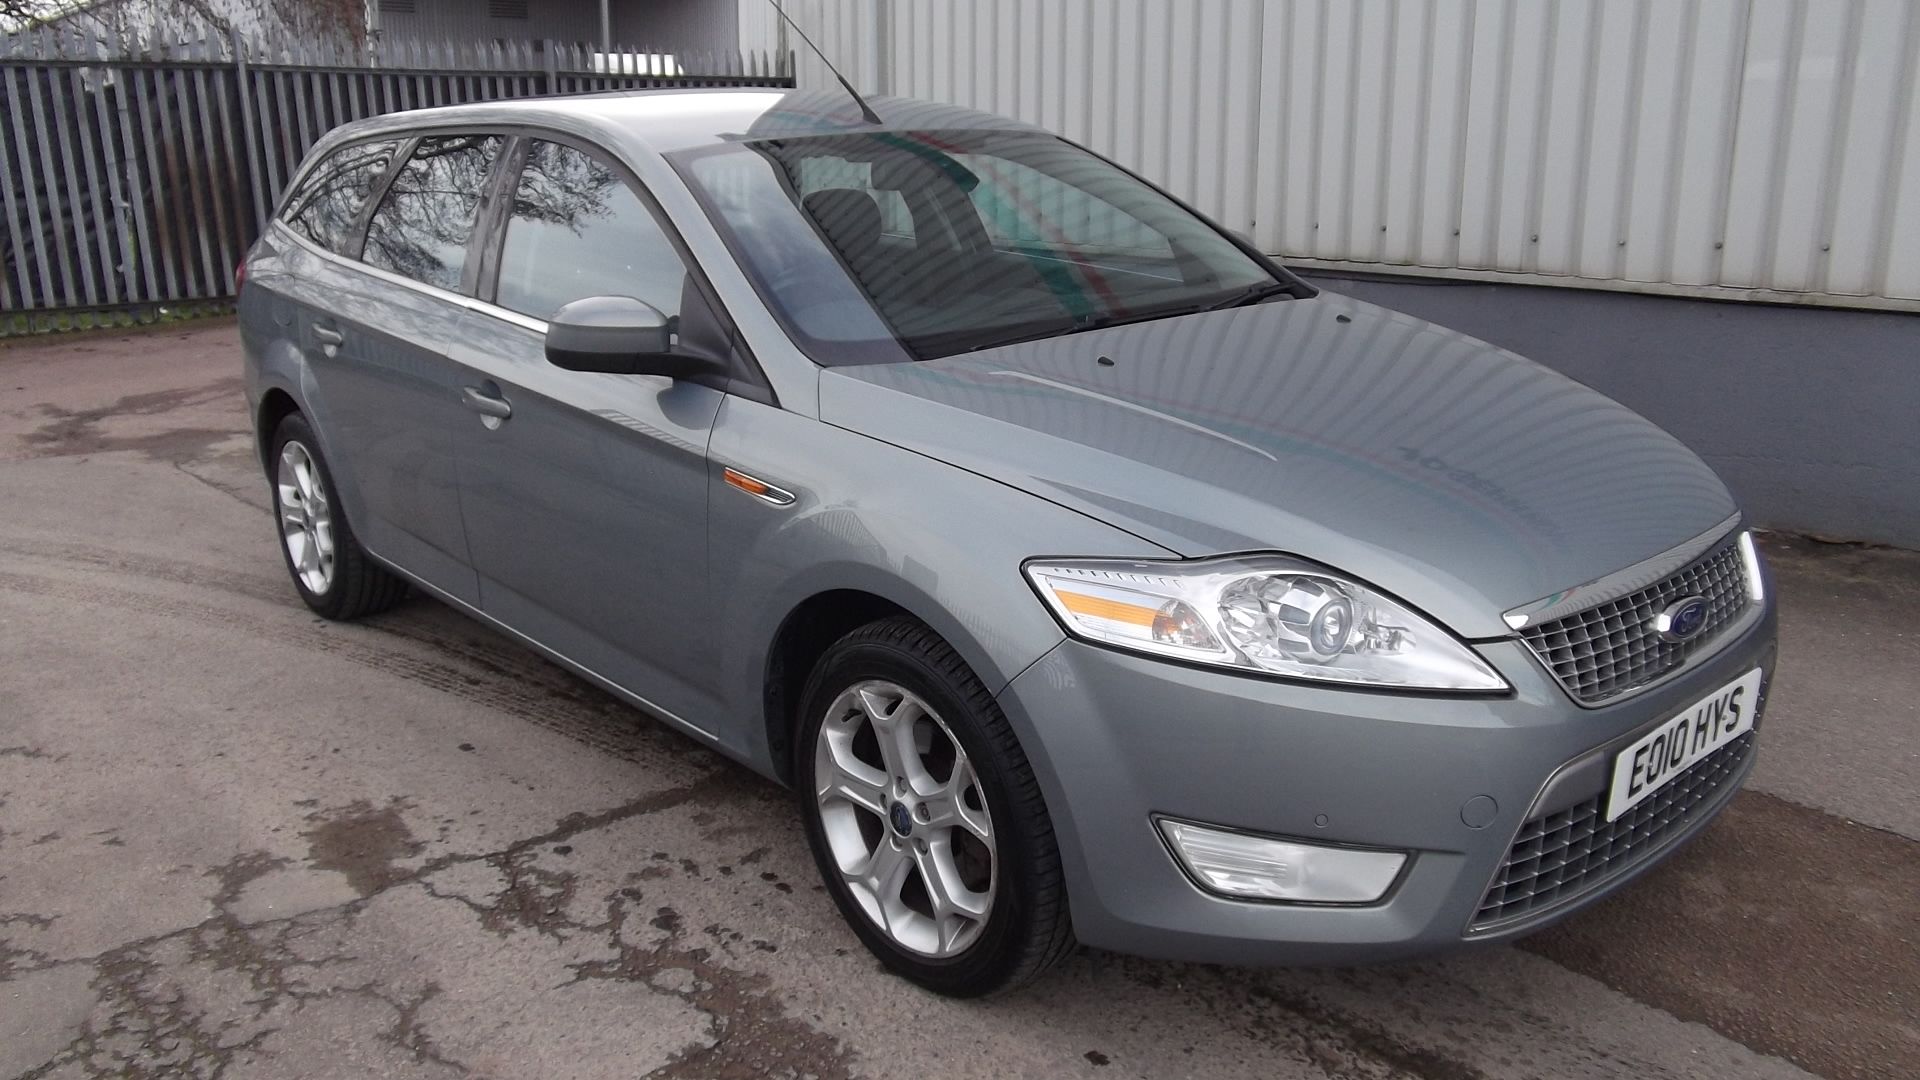 2010 Ford Mondeo Titanium X Tdci A 5Dr Estate - Full Service History - CL505 - NO VAT ON THE HAMMER - Image 2 of 24